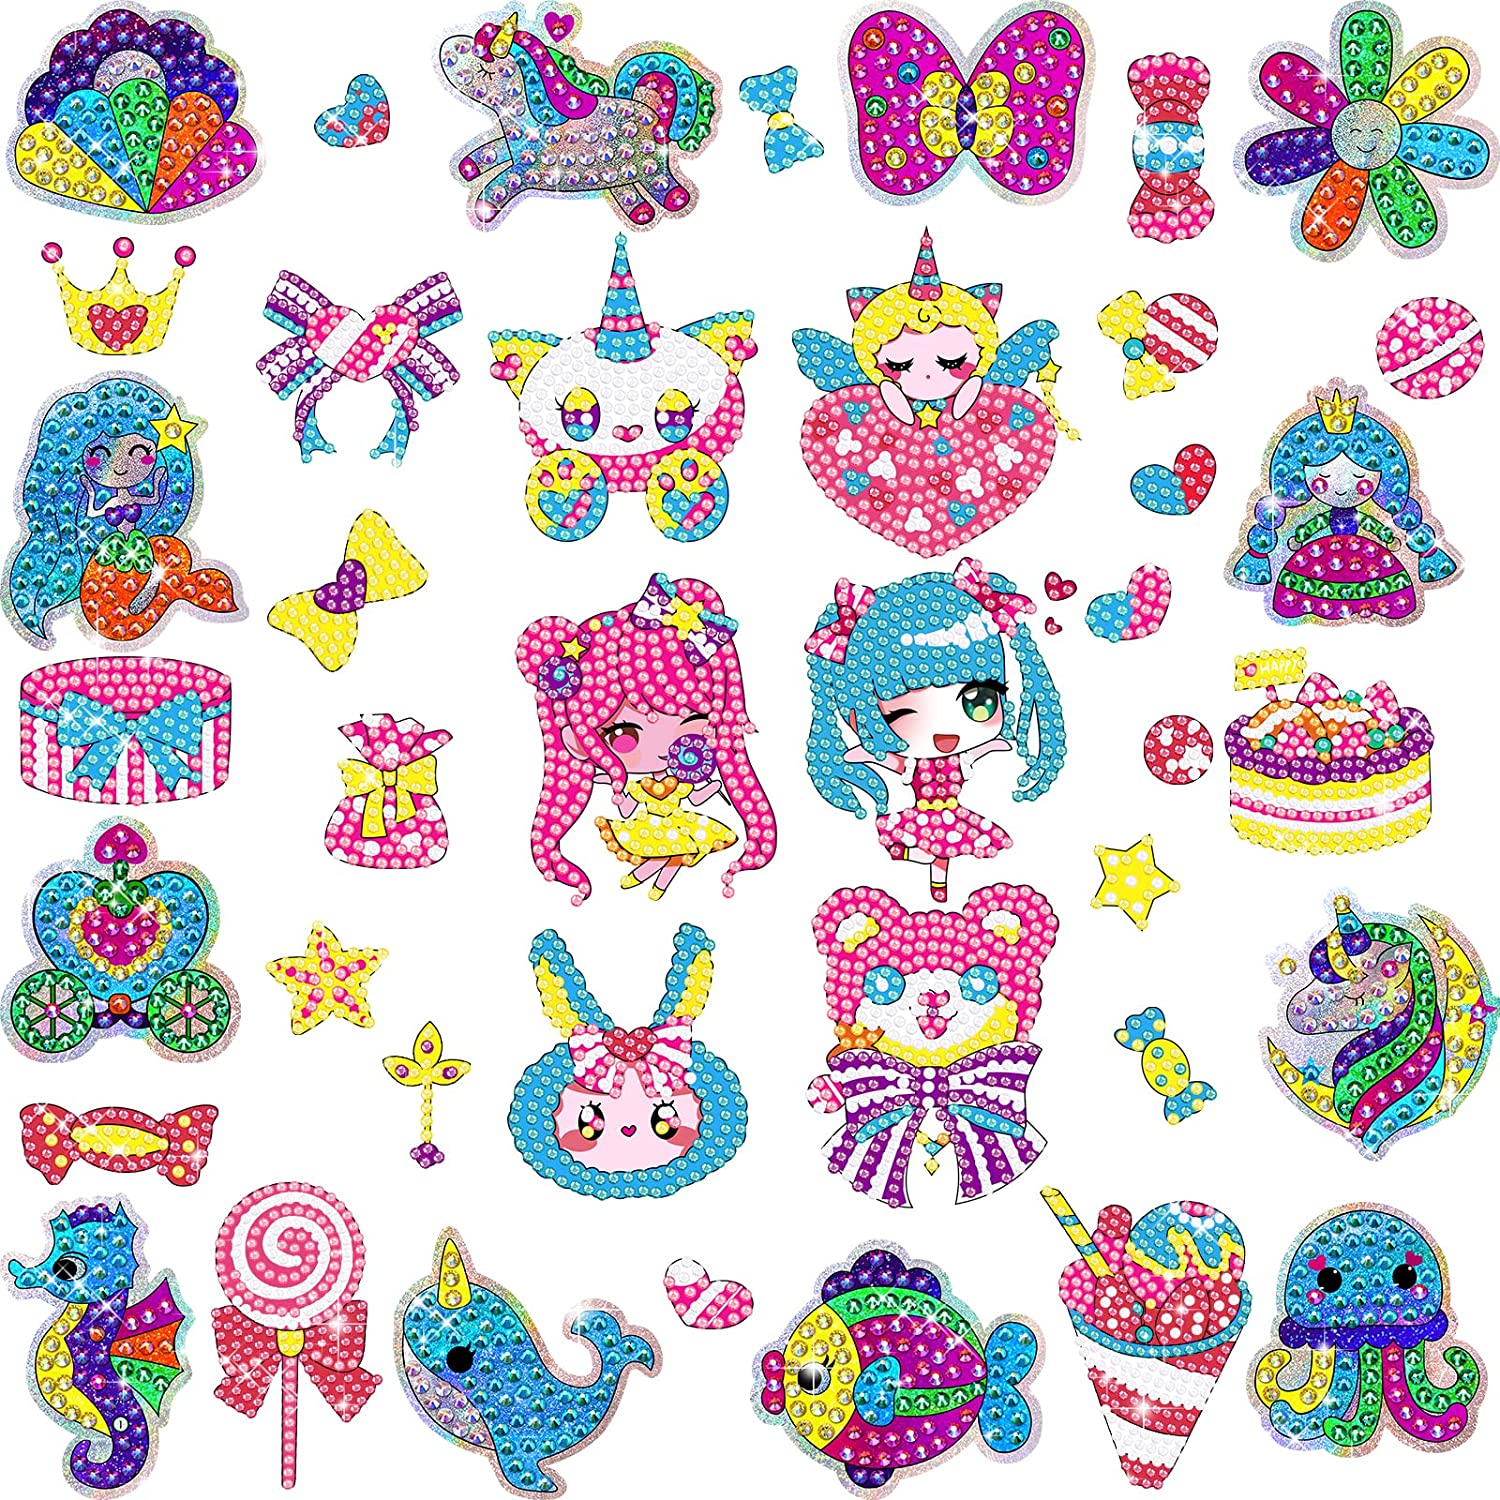 5D Diamond Painting Stickers Kits for Kids Arts and Crafts for Kids Ages  8-12 Easy to DIY Creative Diamond Mosaic Sticker Craft by Numbers Kits for  Kids and Adult Beginners 